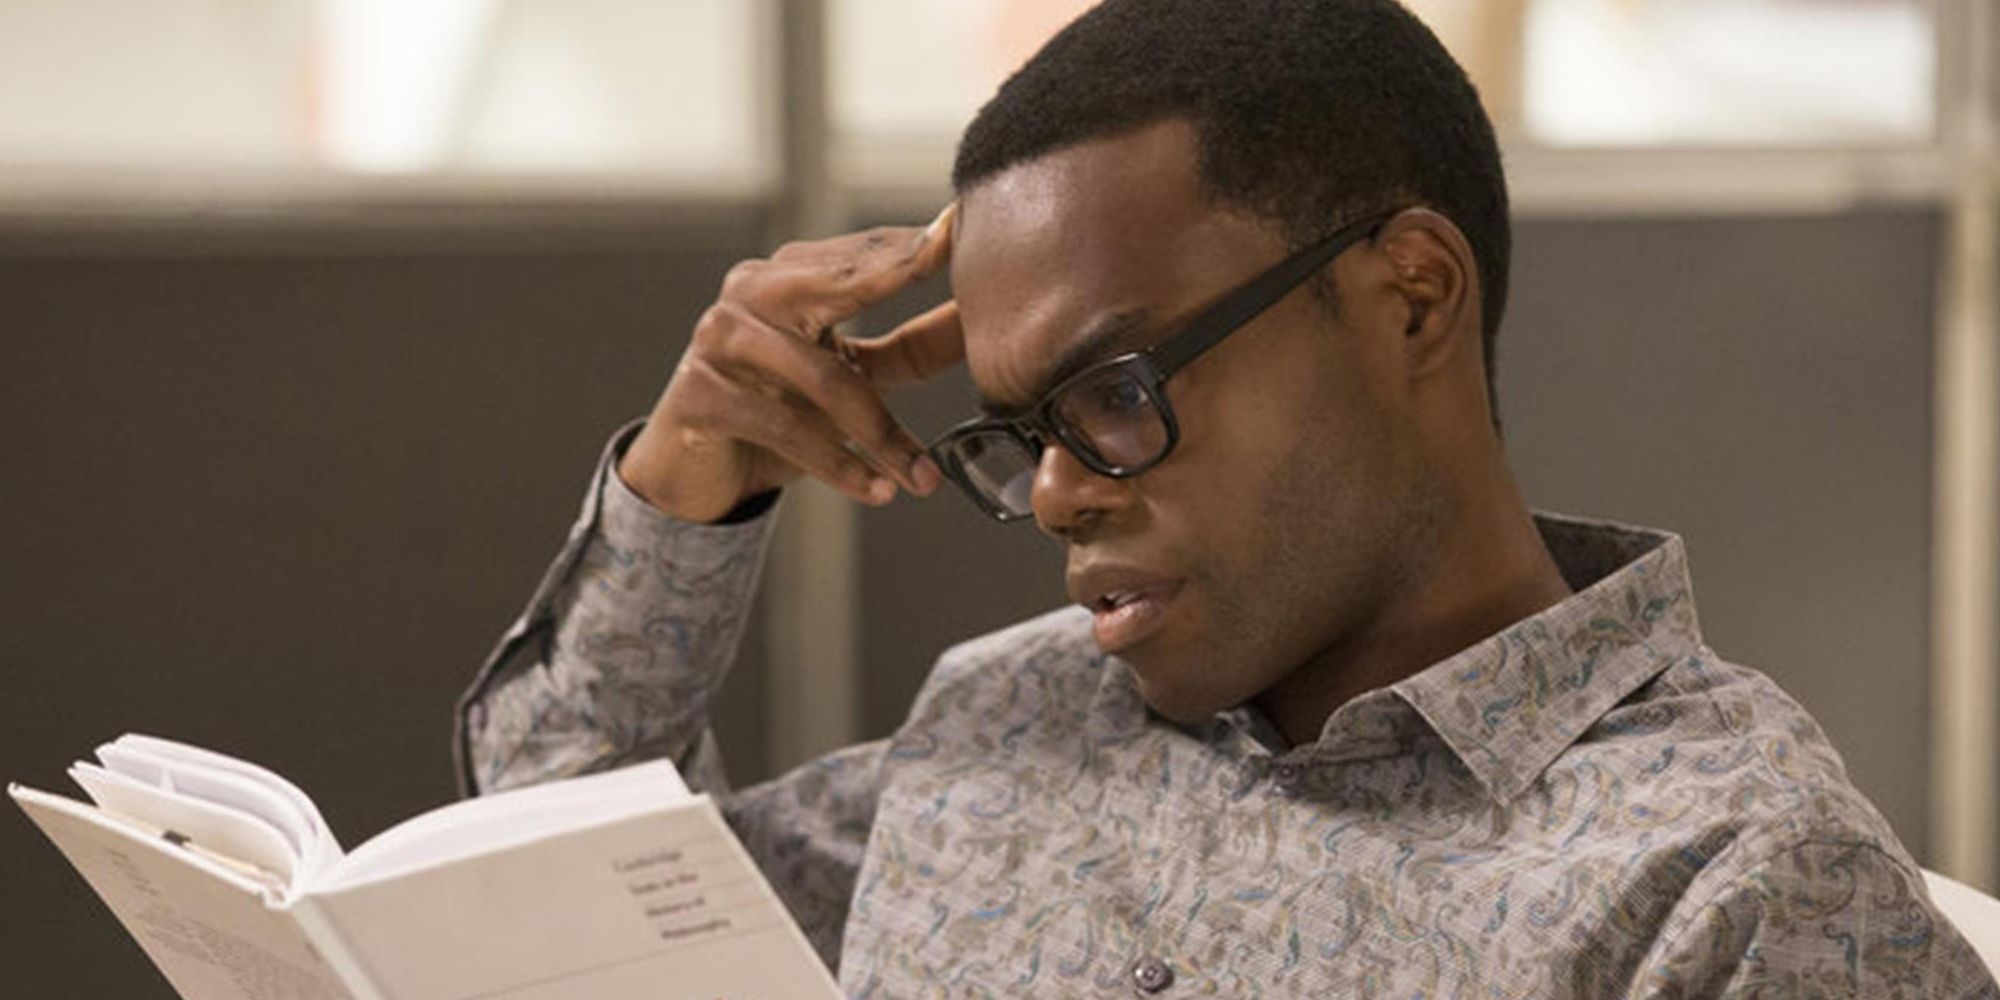 William Jackson Harper reading in The Good Place